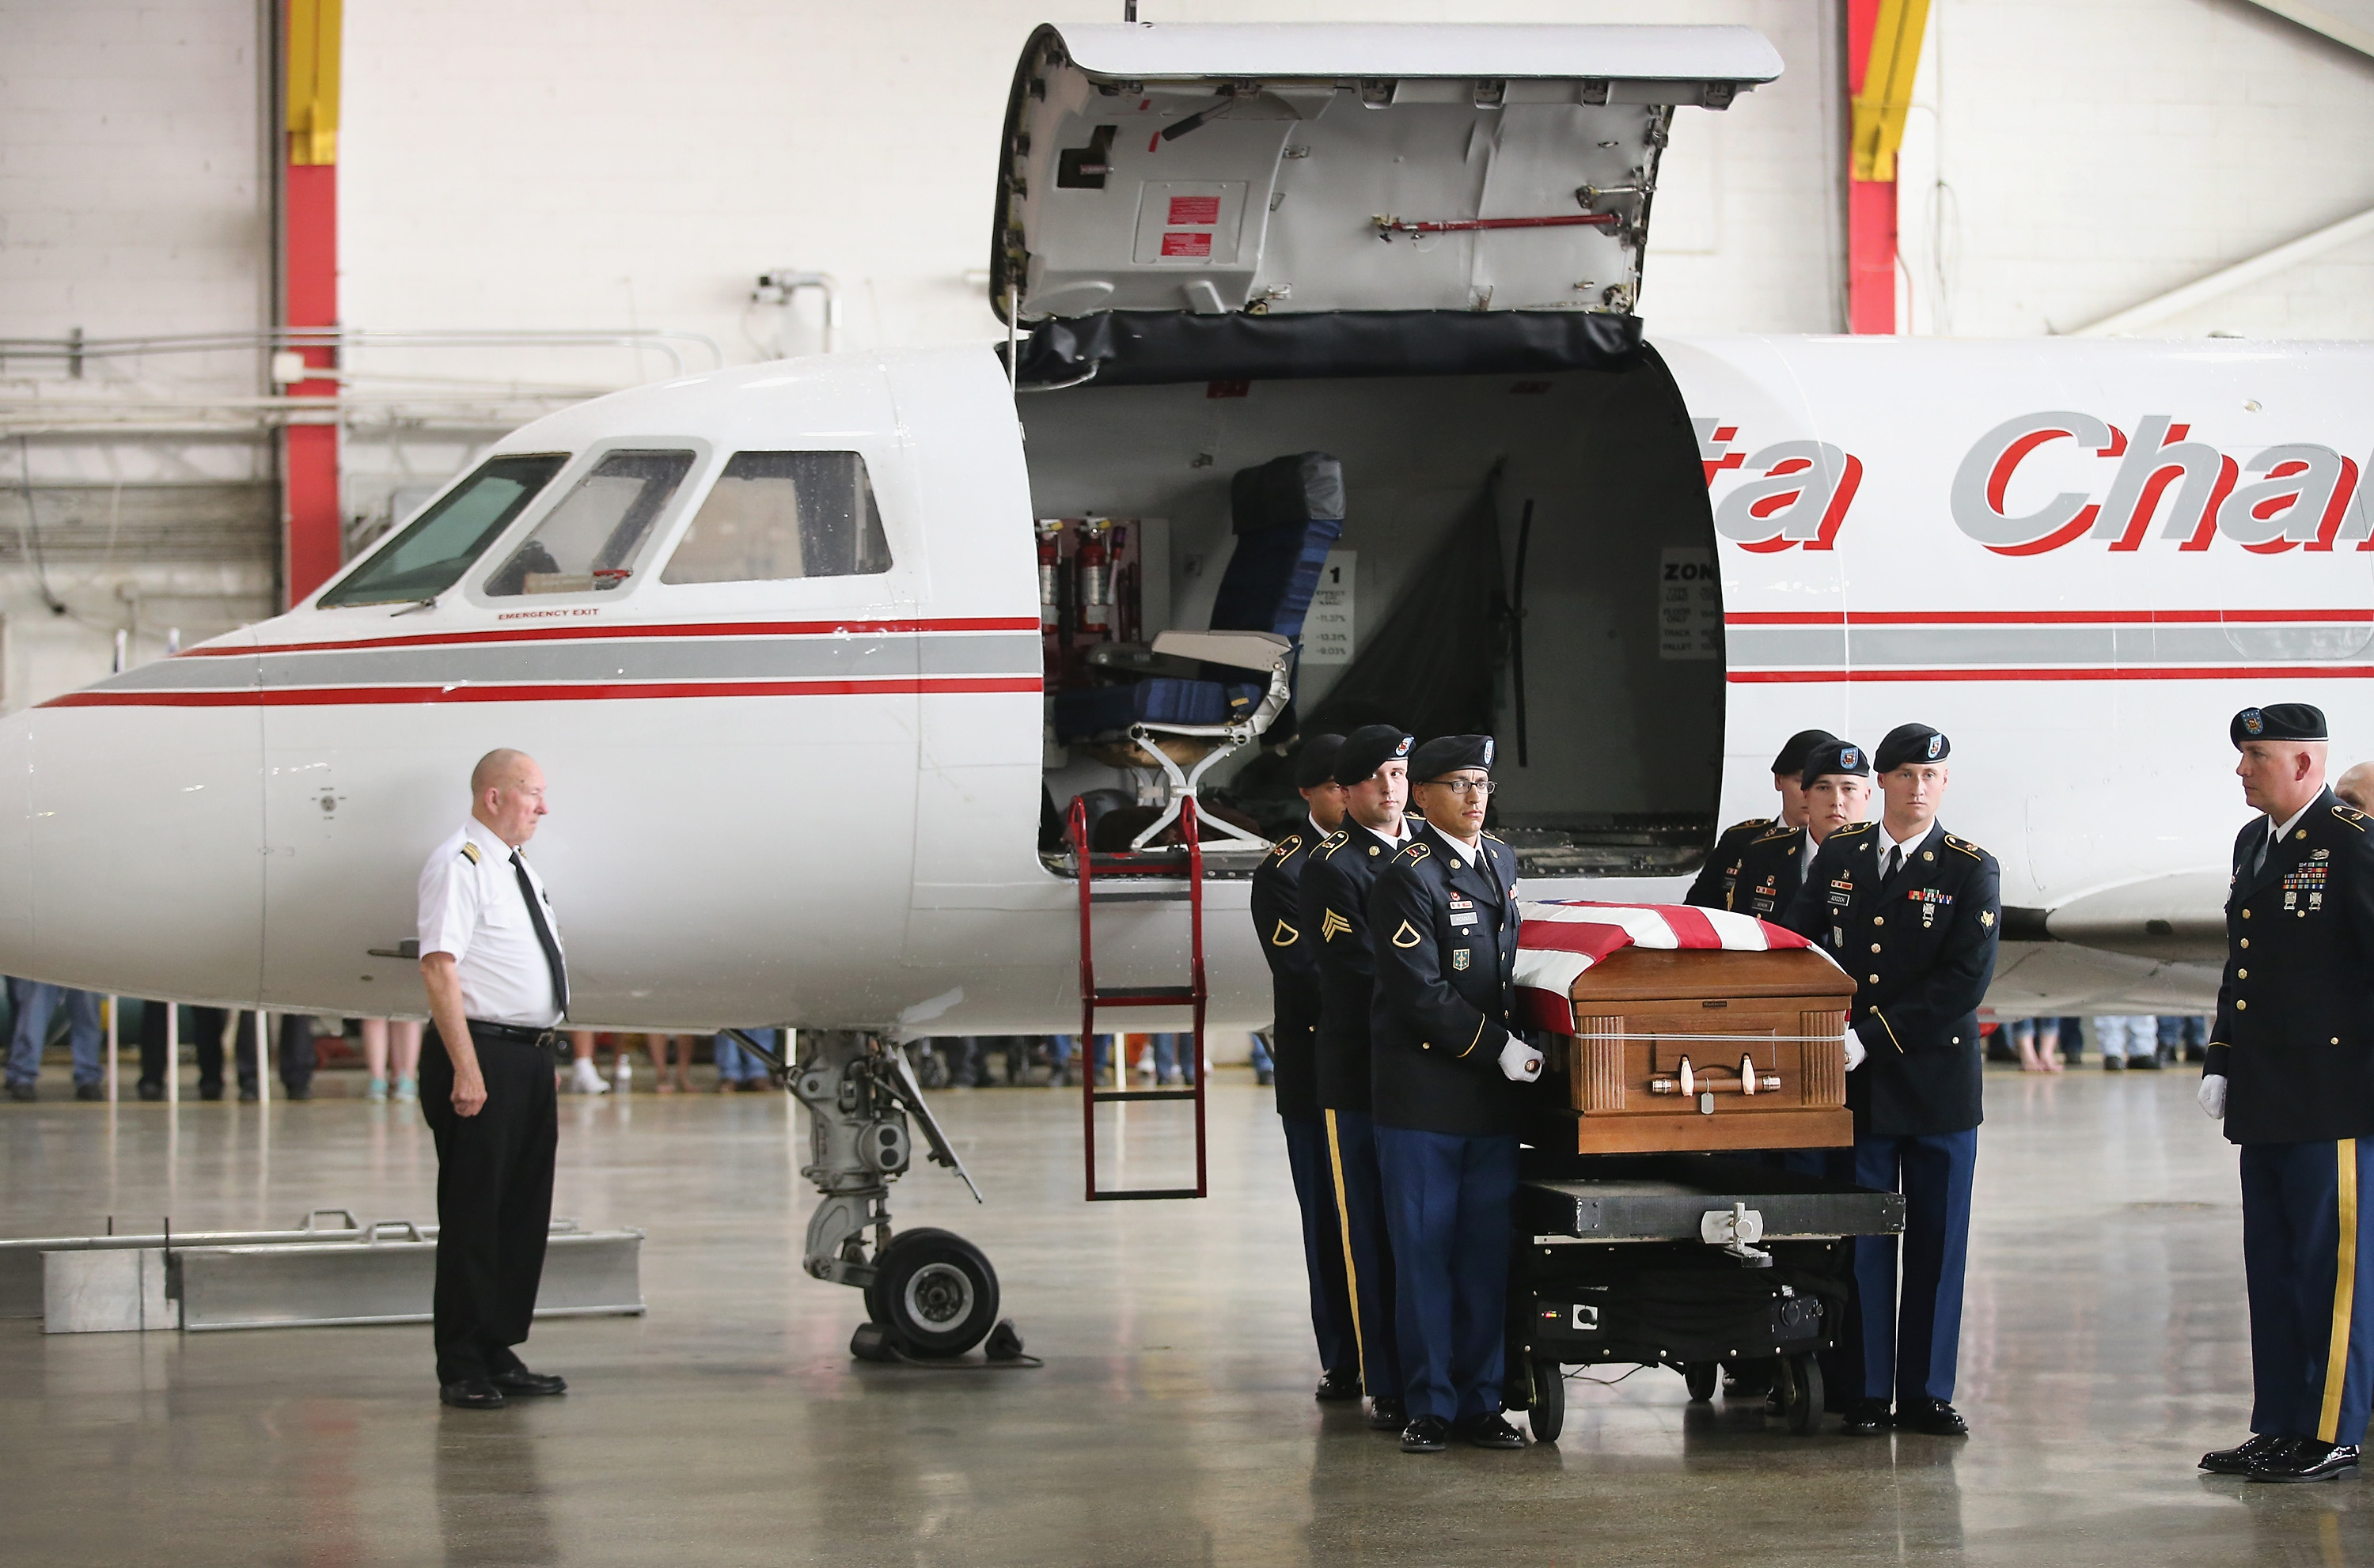 Soldiers carry the remains of Army Pfc. Aaron Toppen to a hearse after they arrived at Midway Airport on a charter aircraft from Dover Air Force Base on June 21, 2014 in Chicago.